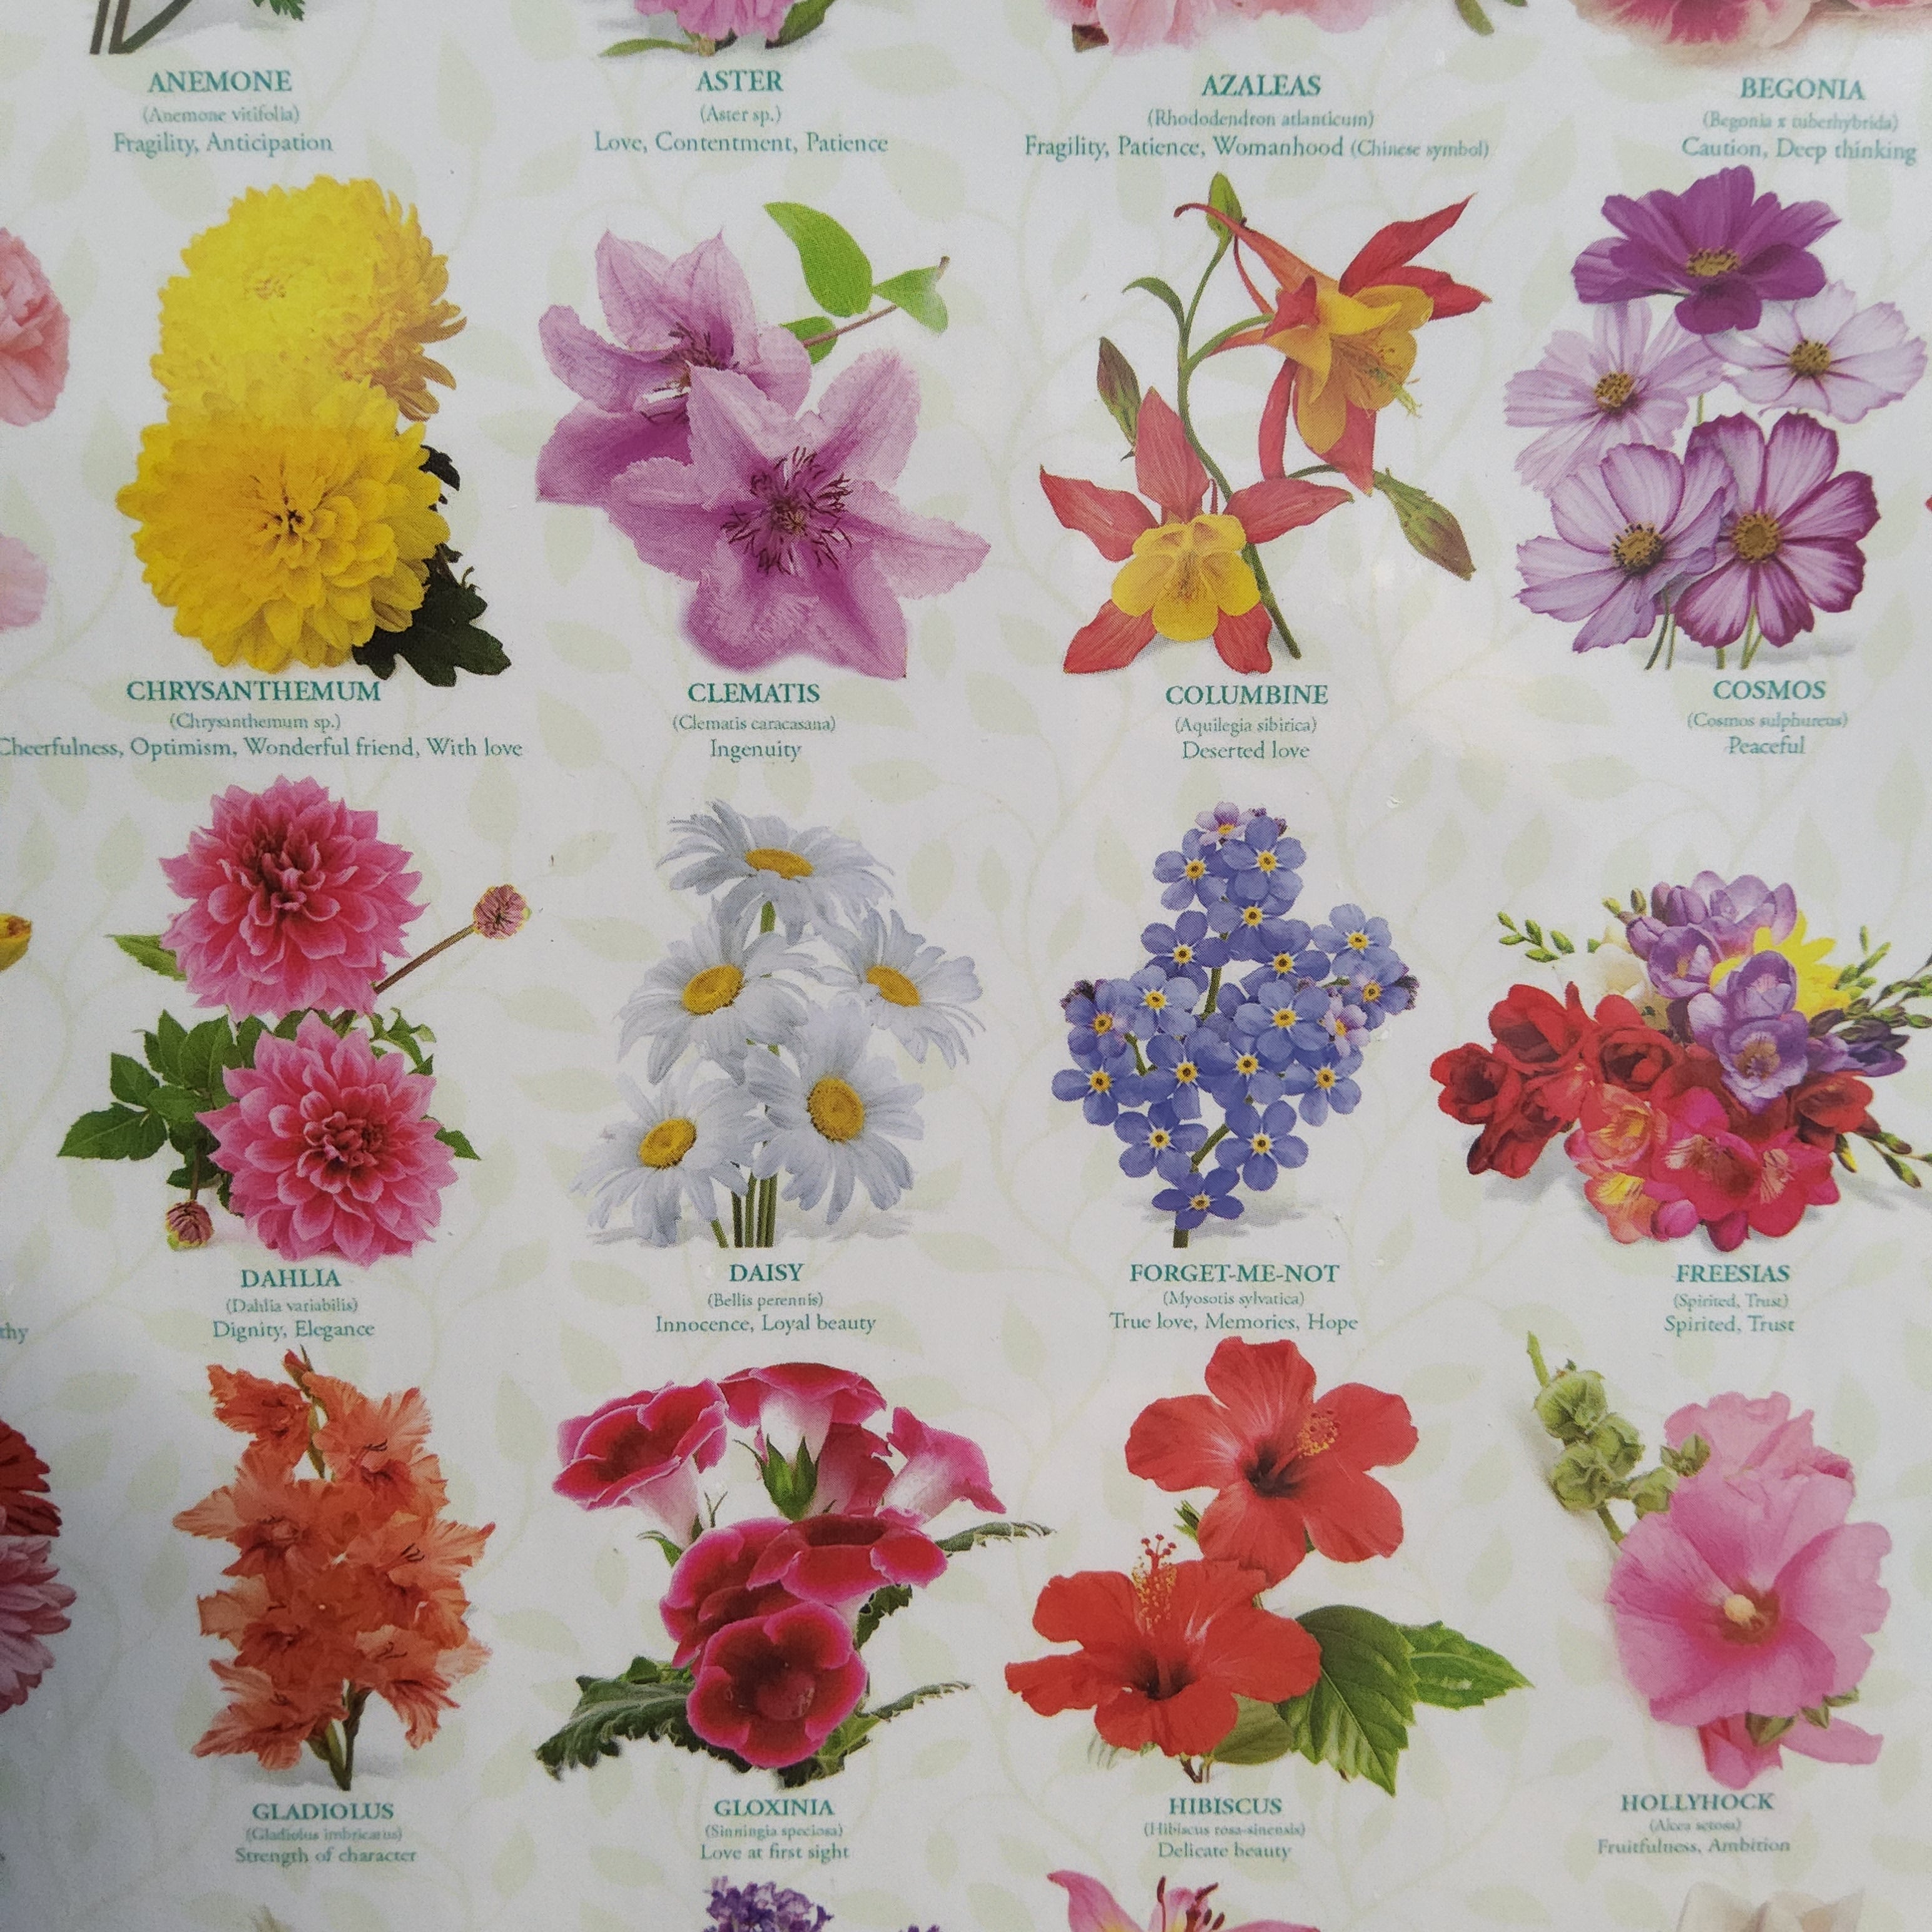 Eurographics Puzzle - The Language of Flowers - 1000 pieces - 6000-0579